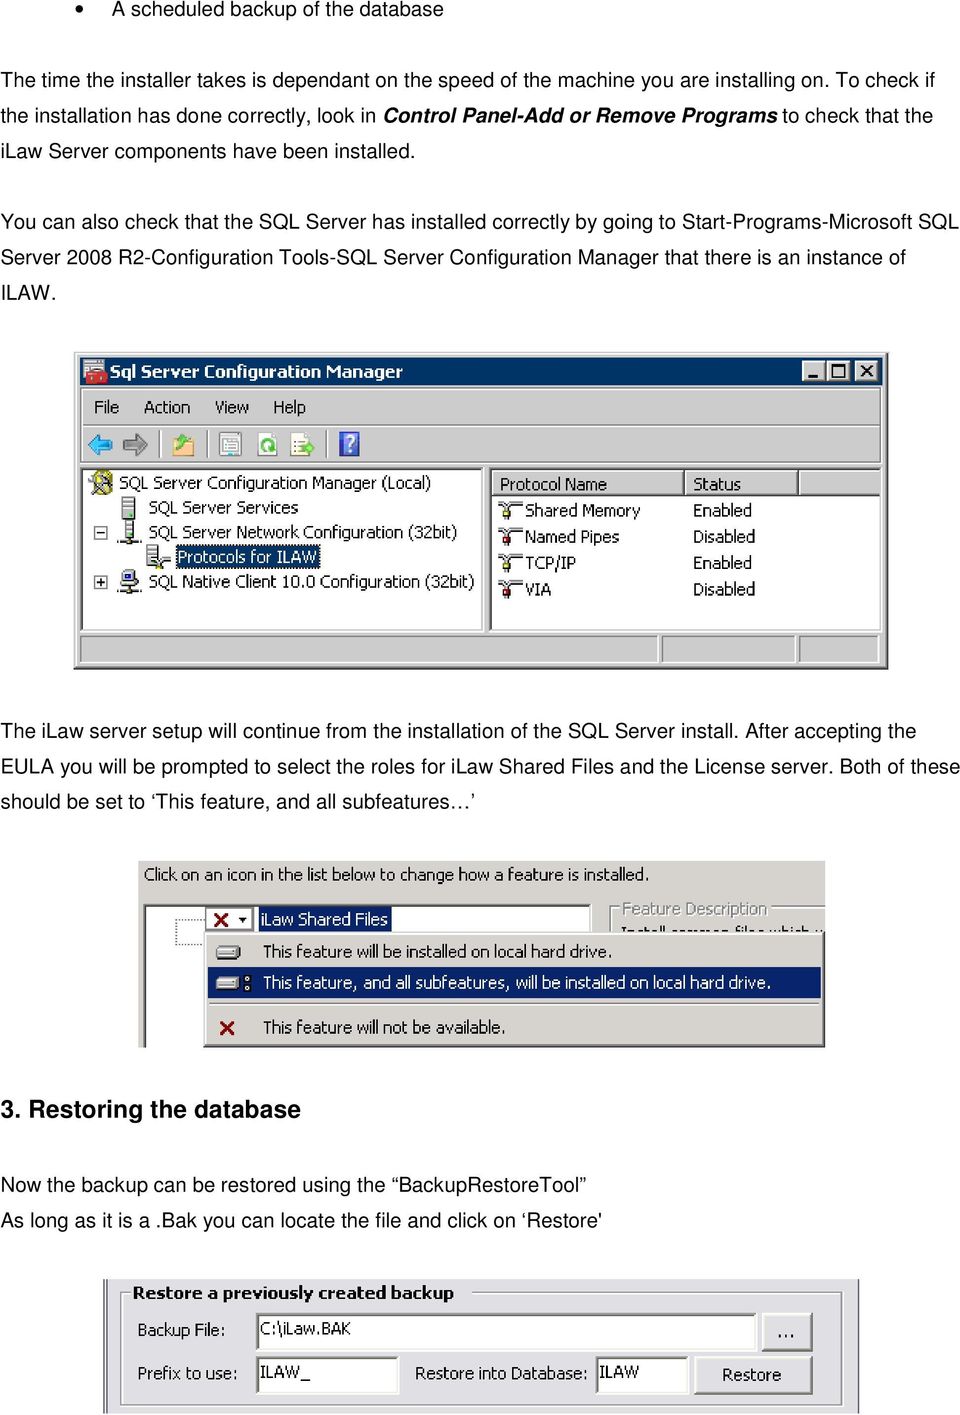 You can also check that the SQL Server has installed correctly by going to Start-Programs-Microsoft SQL Server 2008 R2-Configuration Tools-SQL Server Configuration Manager that there is an instance